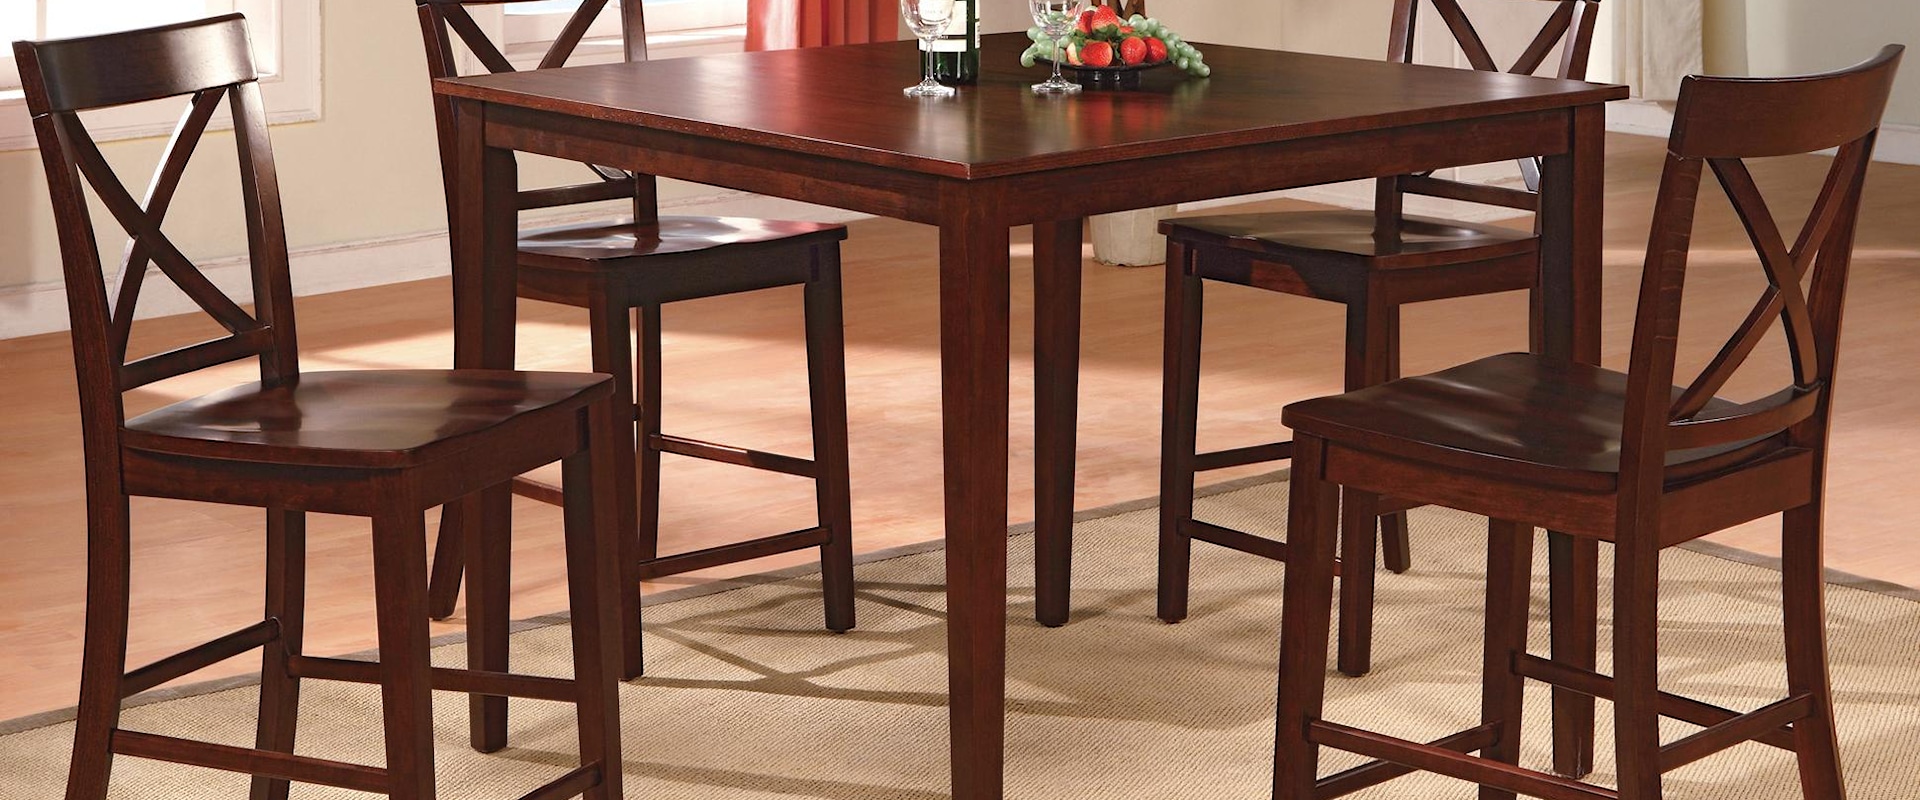 5 Piece Counter Height Table Set with 4 Crossback Chairs